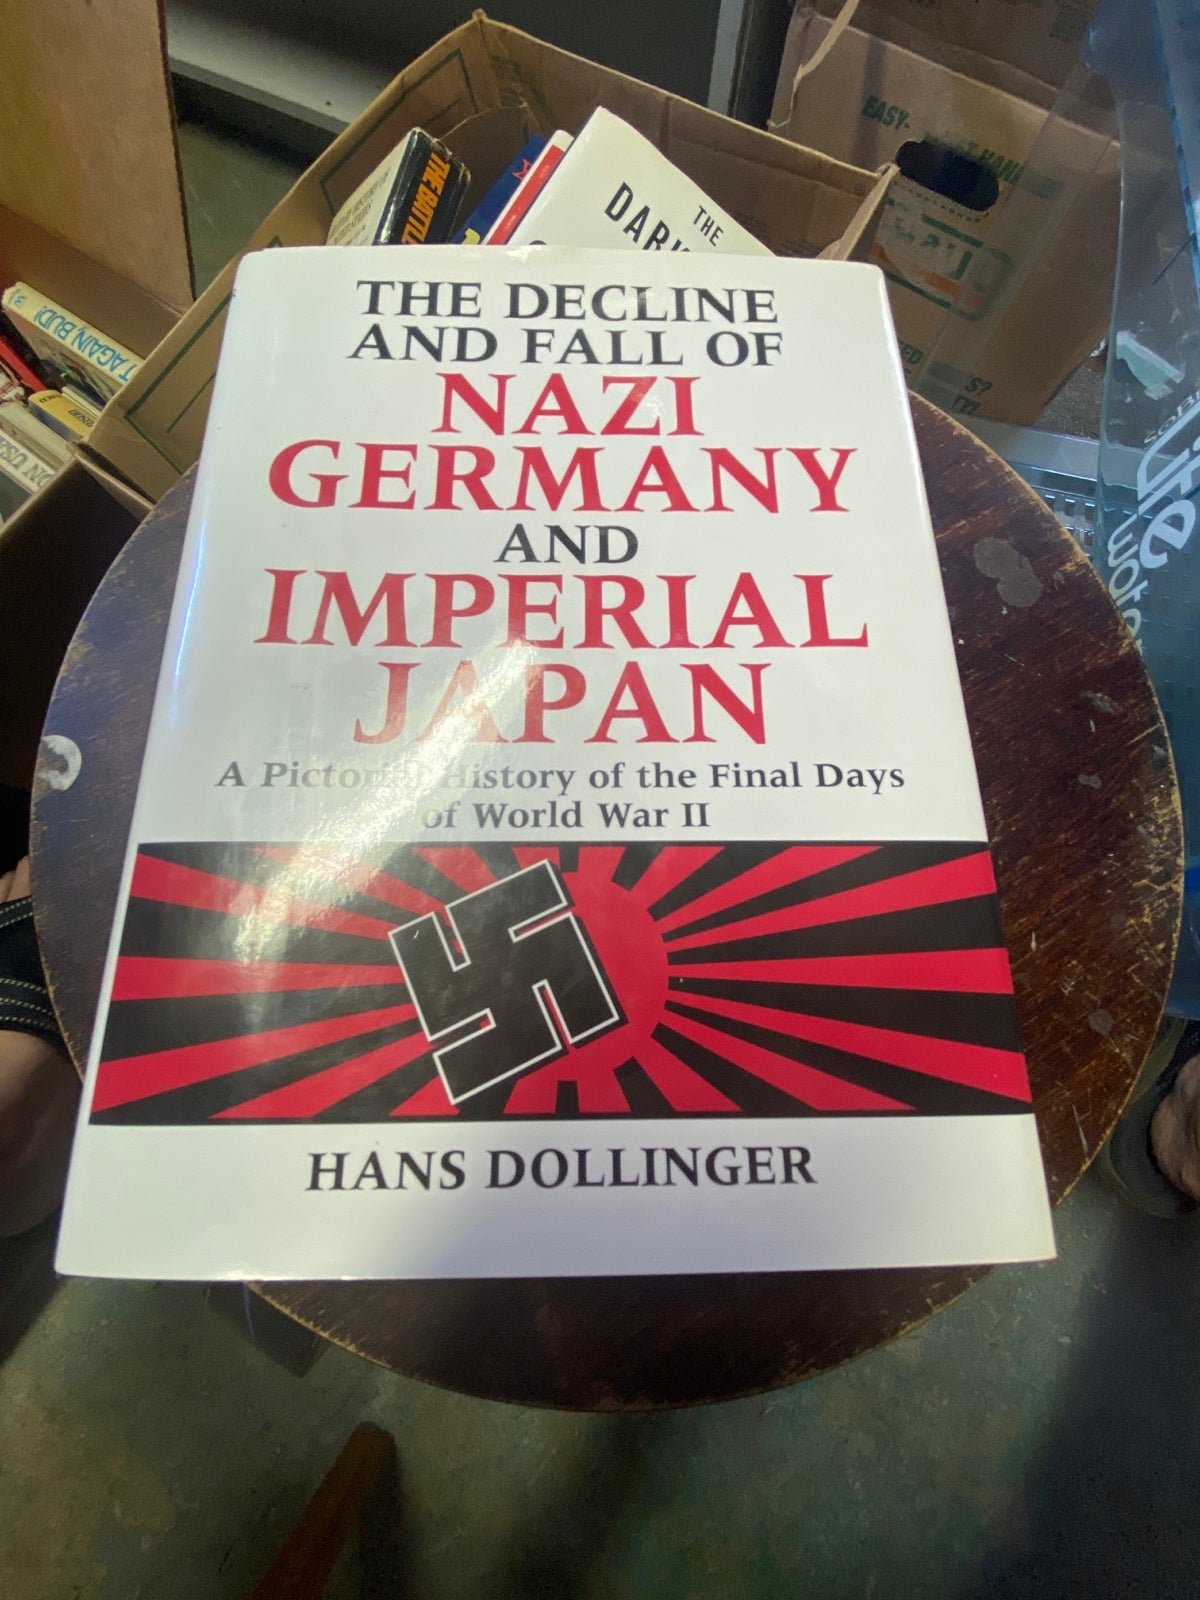 The decline and fall of nazi germany and imperial Japan book DgaopLBDS